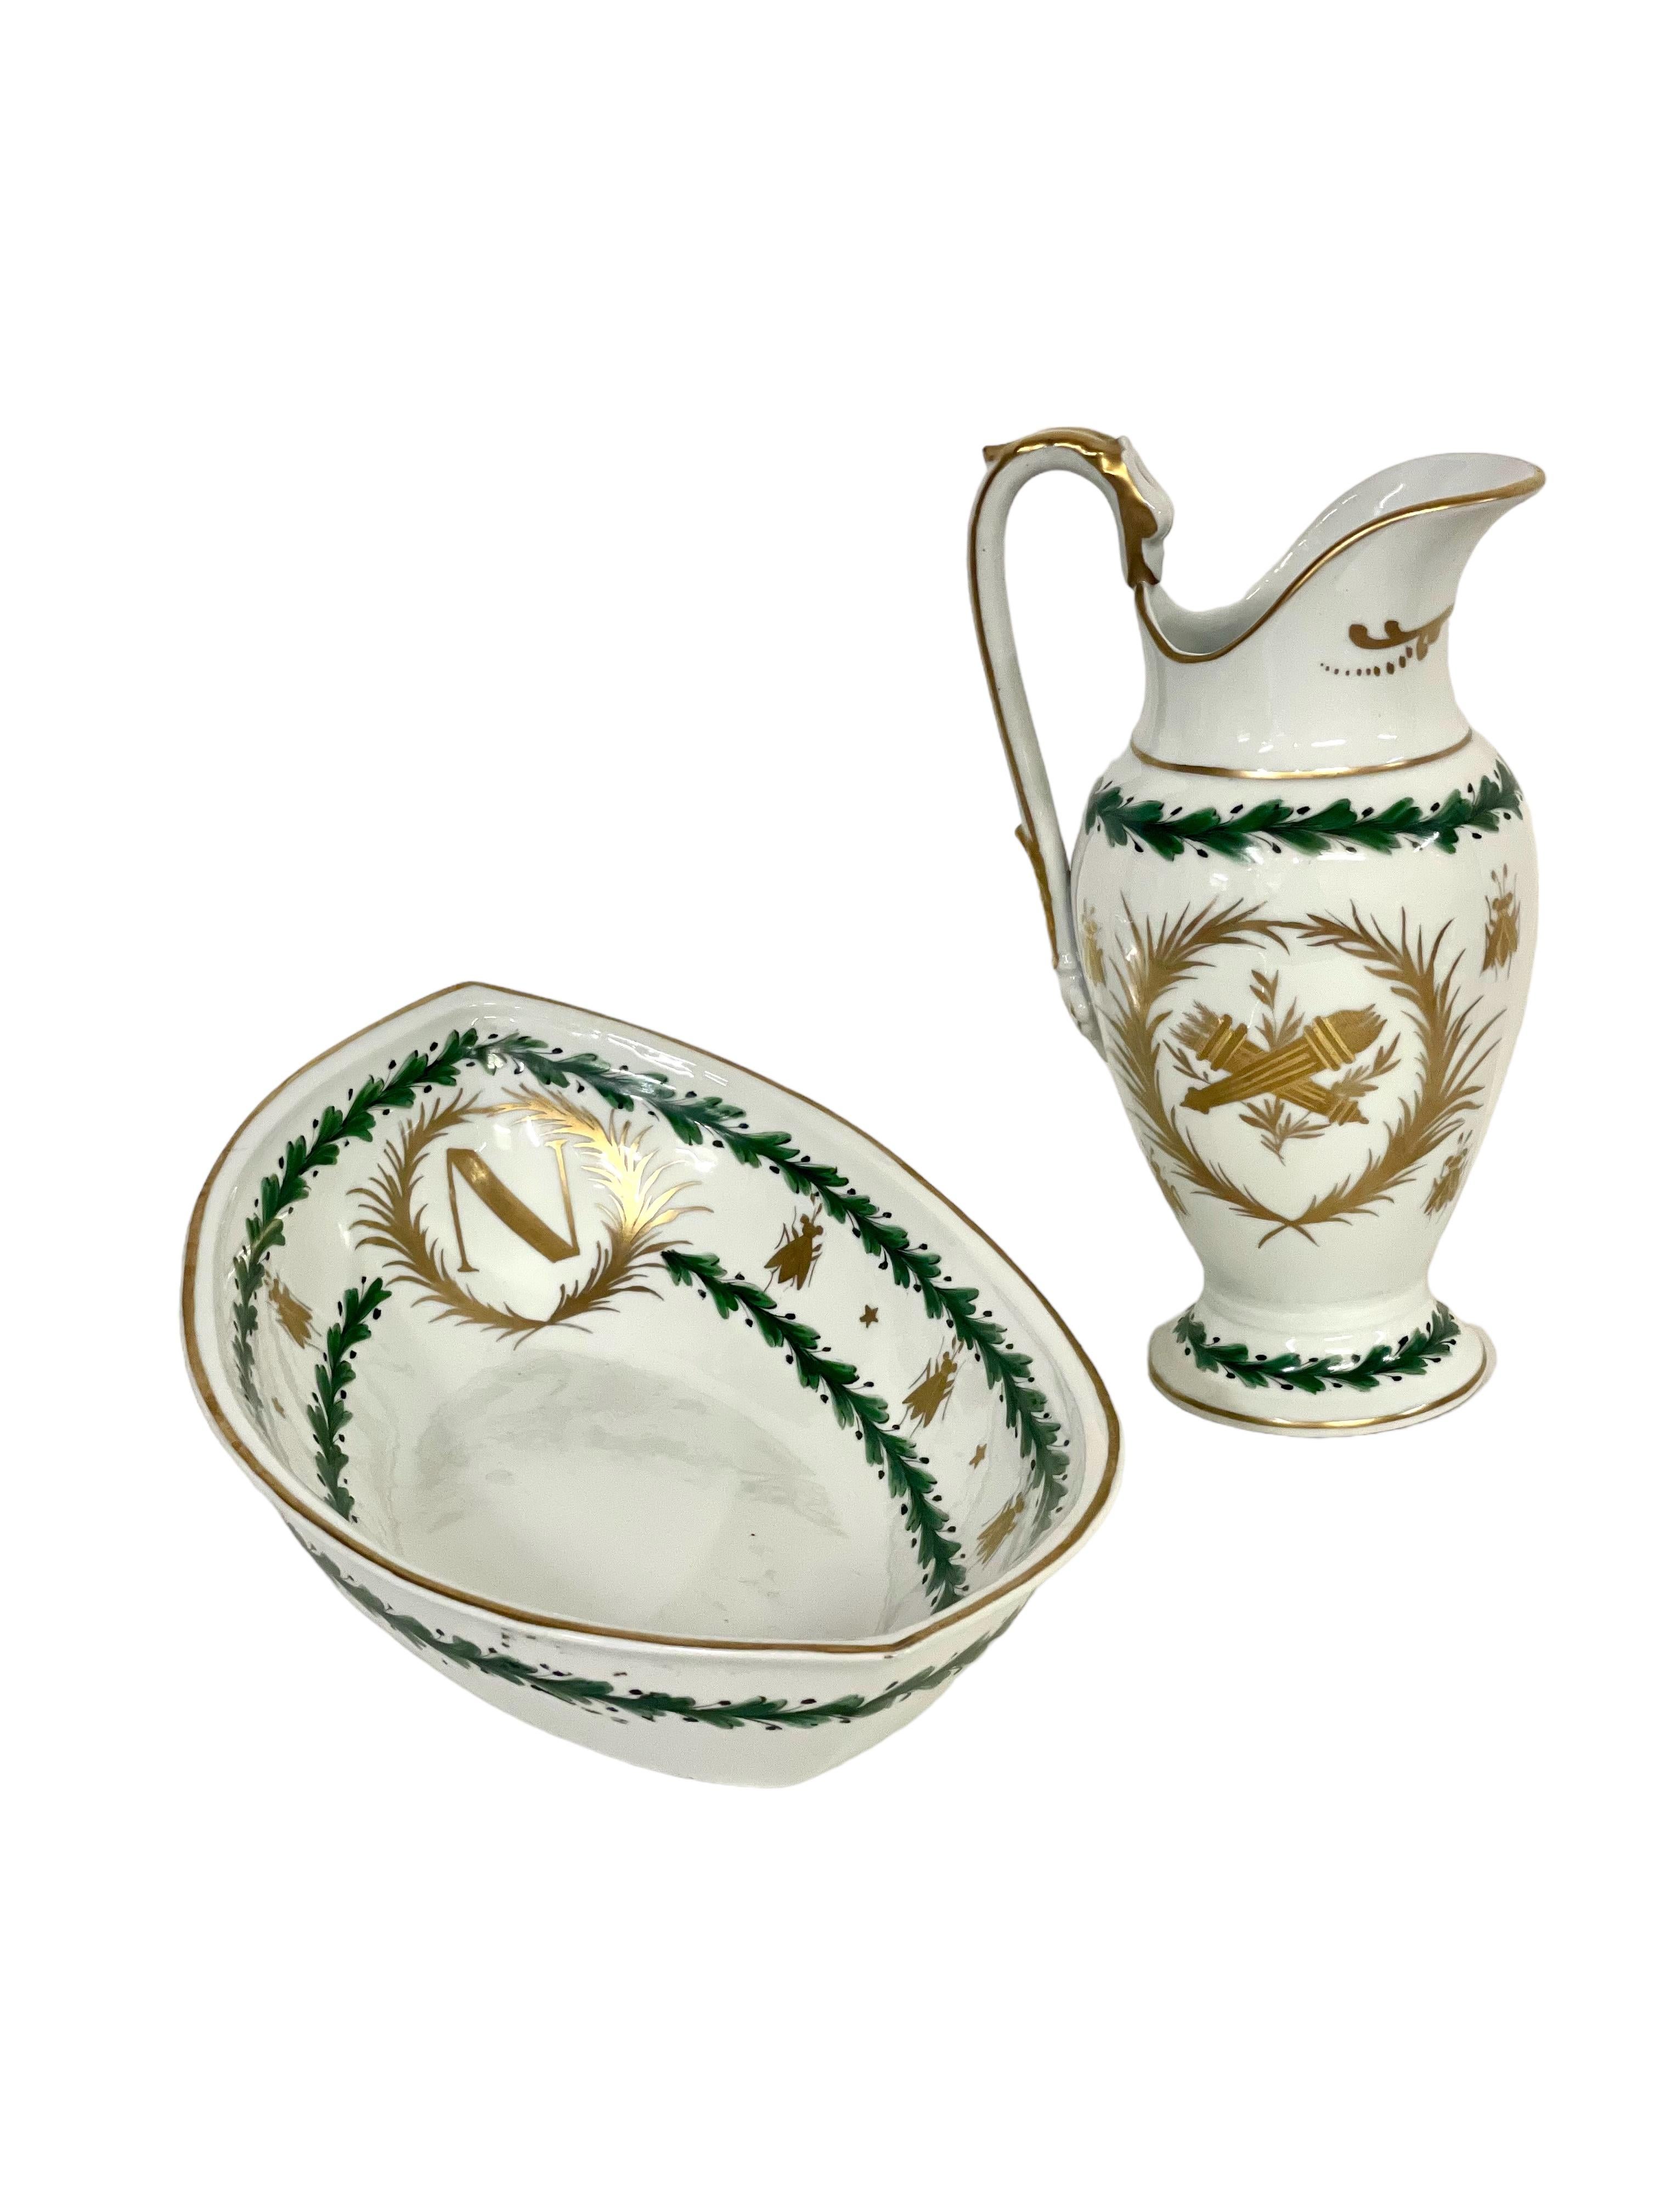 An extremely elegant Paris Porcelain wash basin and pitcher dating from the First Empire Period, around 1815, and featuring as its decoration the emblems of the Emperor Napoleon himself: an eagle, bees, laurel wreaths and the capital letter 'N'. The